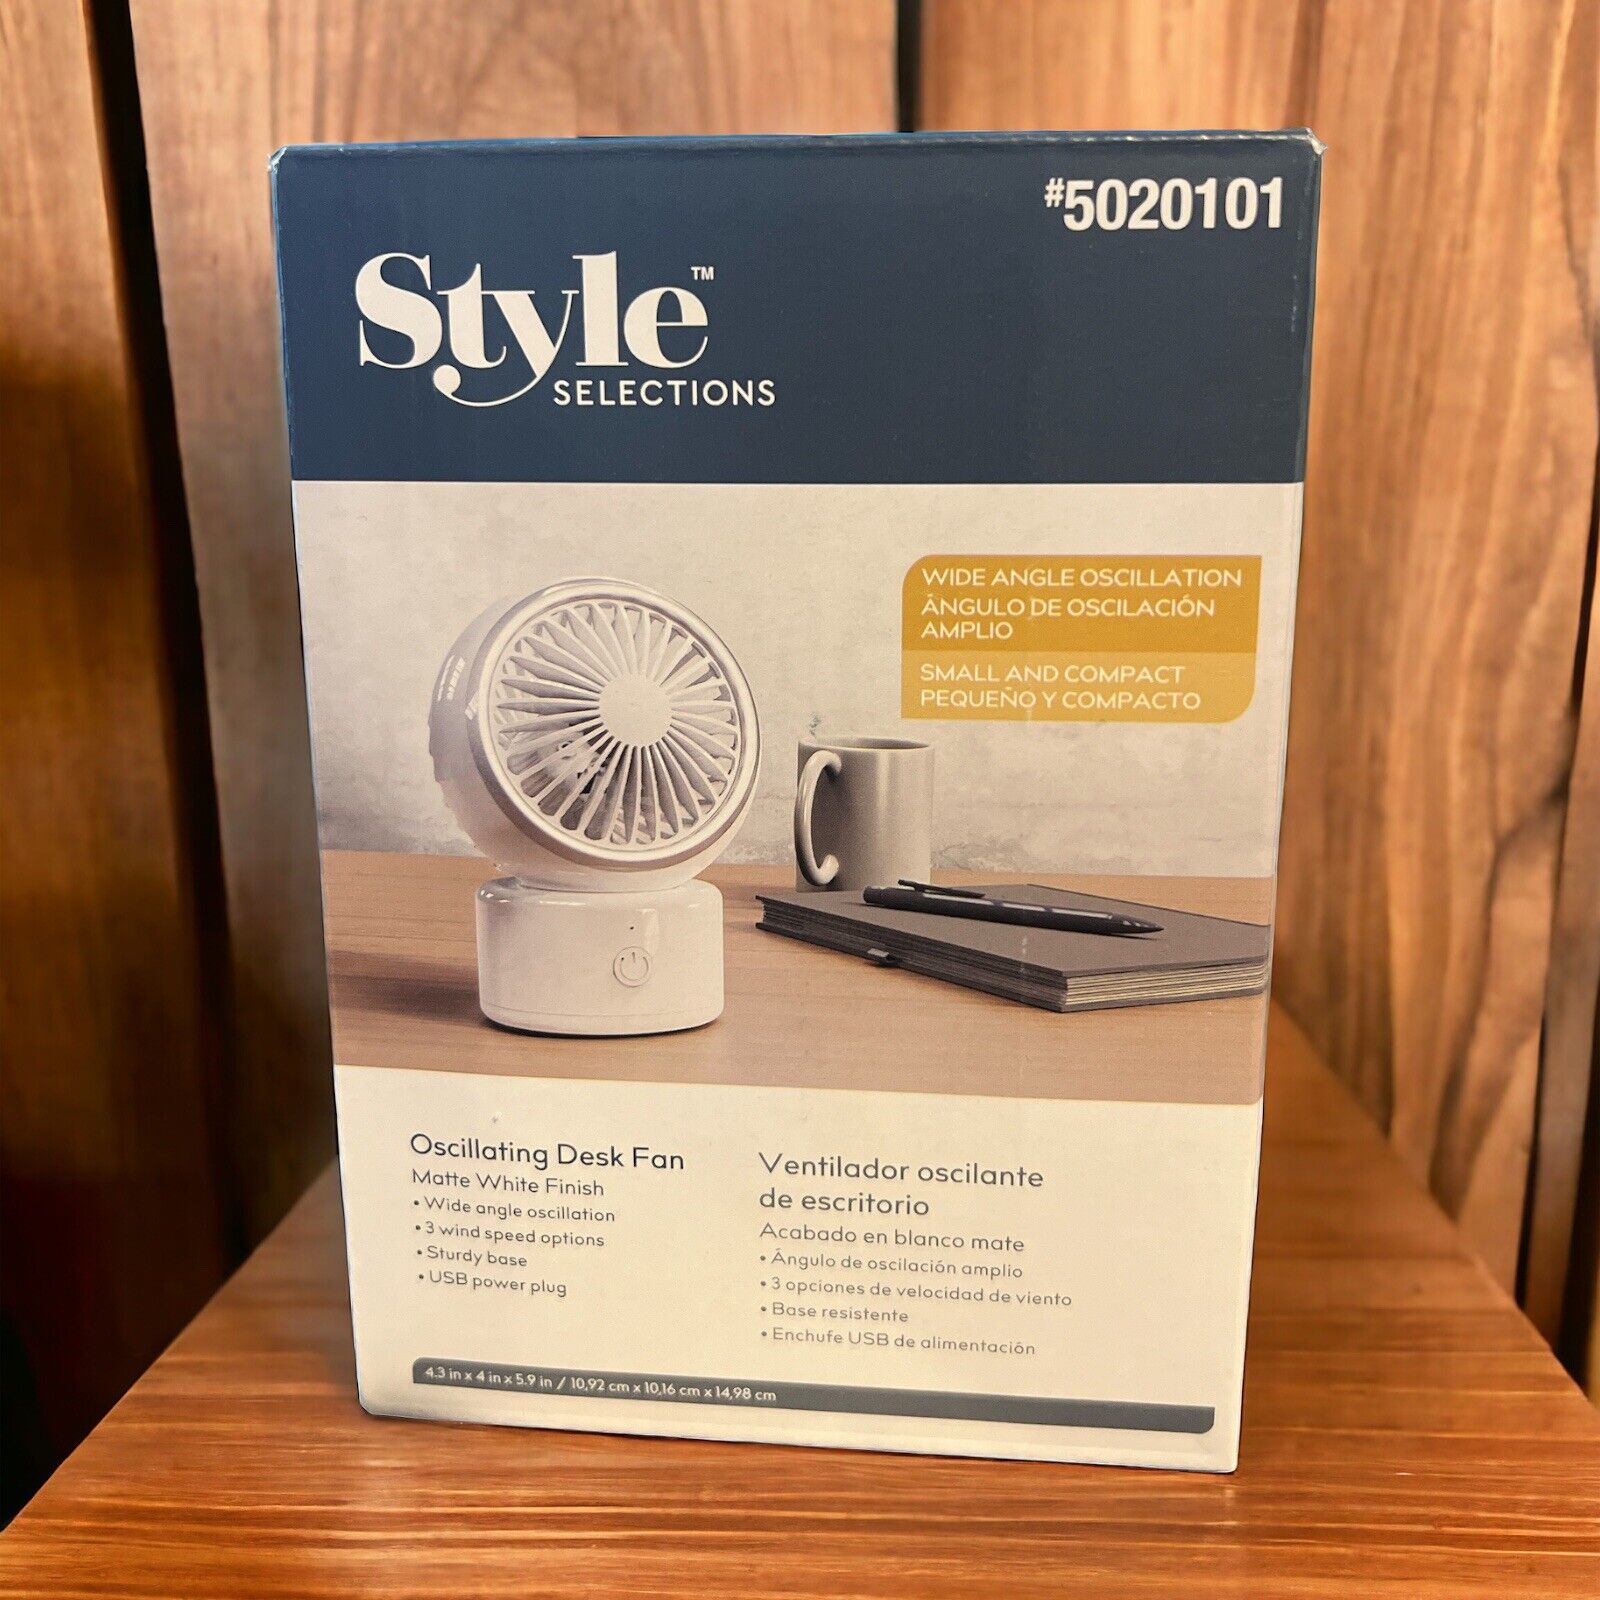 Style Selections 5020101 3 Speed Oscillating Desk Fan USB Powered Ships Free